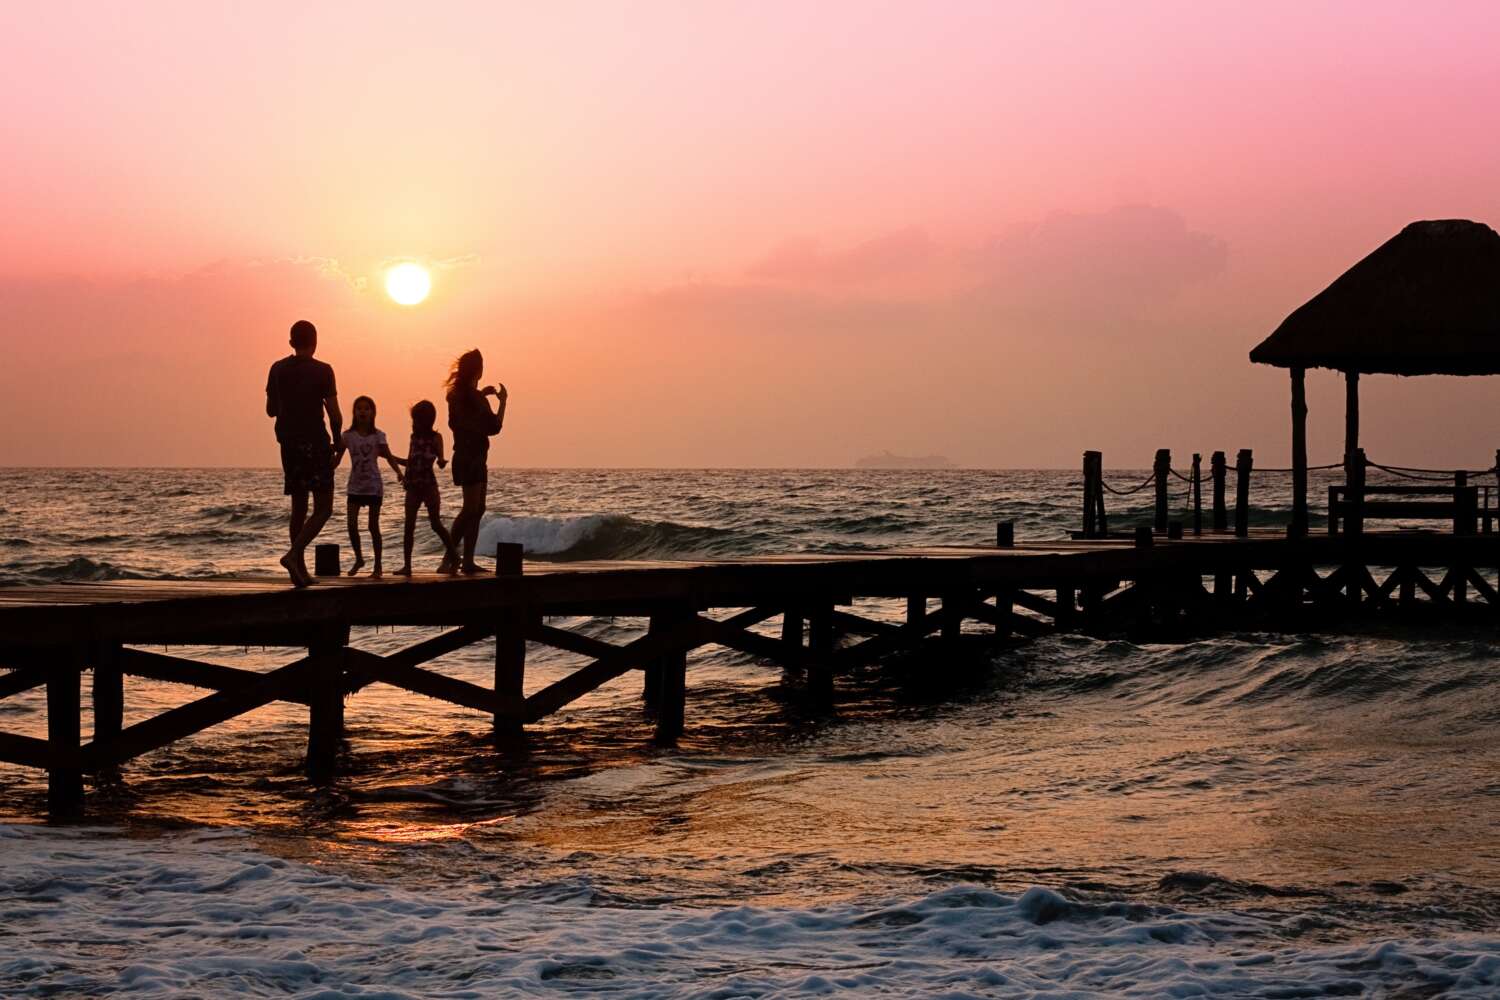 This image is taken around the time when the sun is about to set. It shows a wooden walking area near a beach and there is a family of four walking on it.